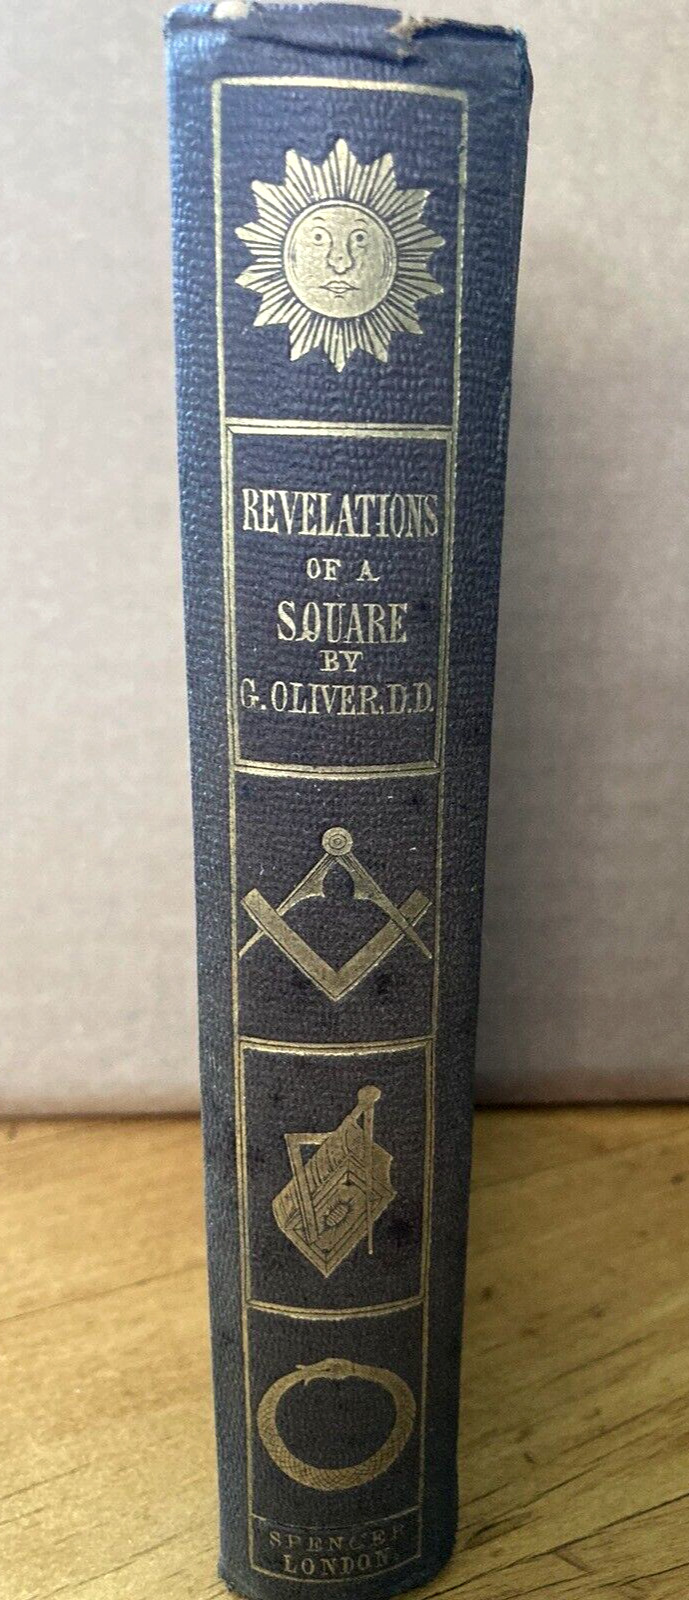 1855 THE REVELATIONS of a SQUARE-MASONIC-1st Ed-1855-G. OLIVER-9 TITLES